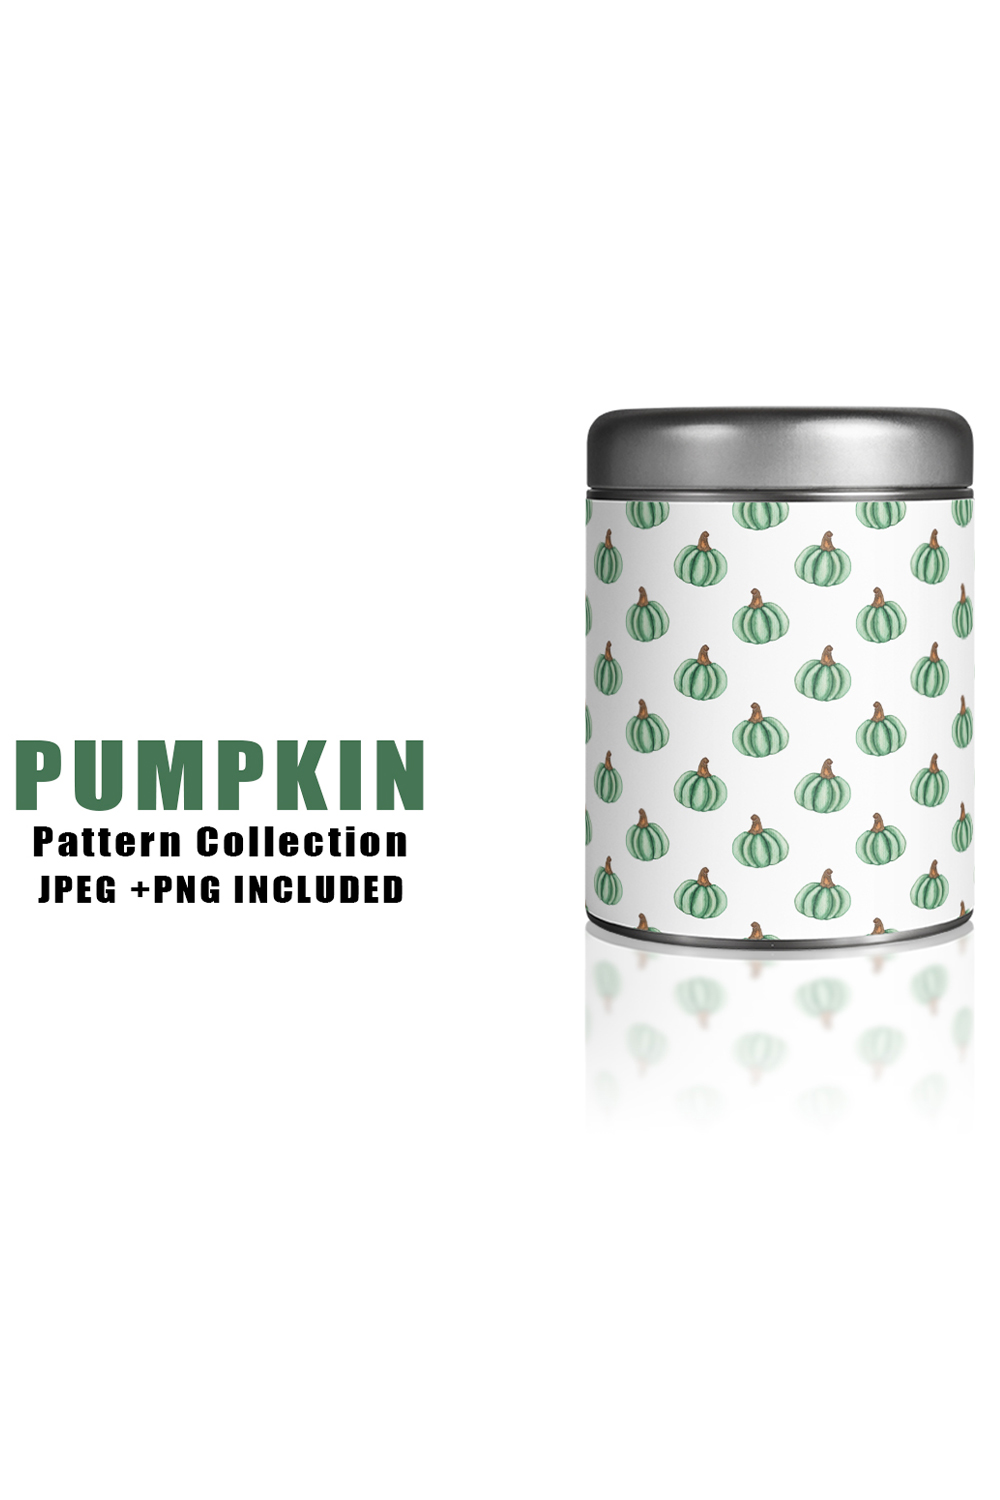 Image of jar with adorable pumpkin patterns